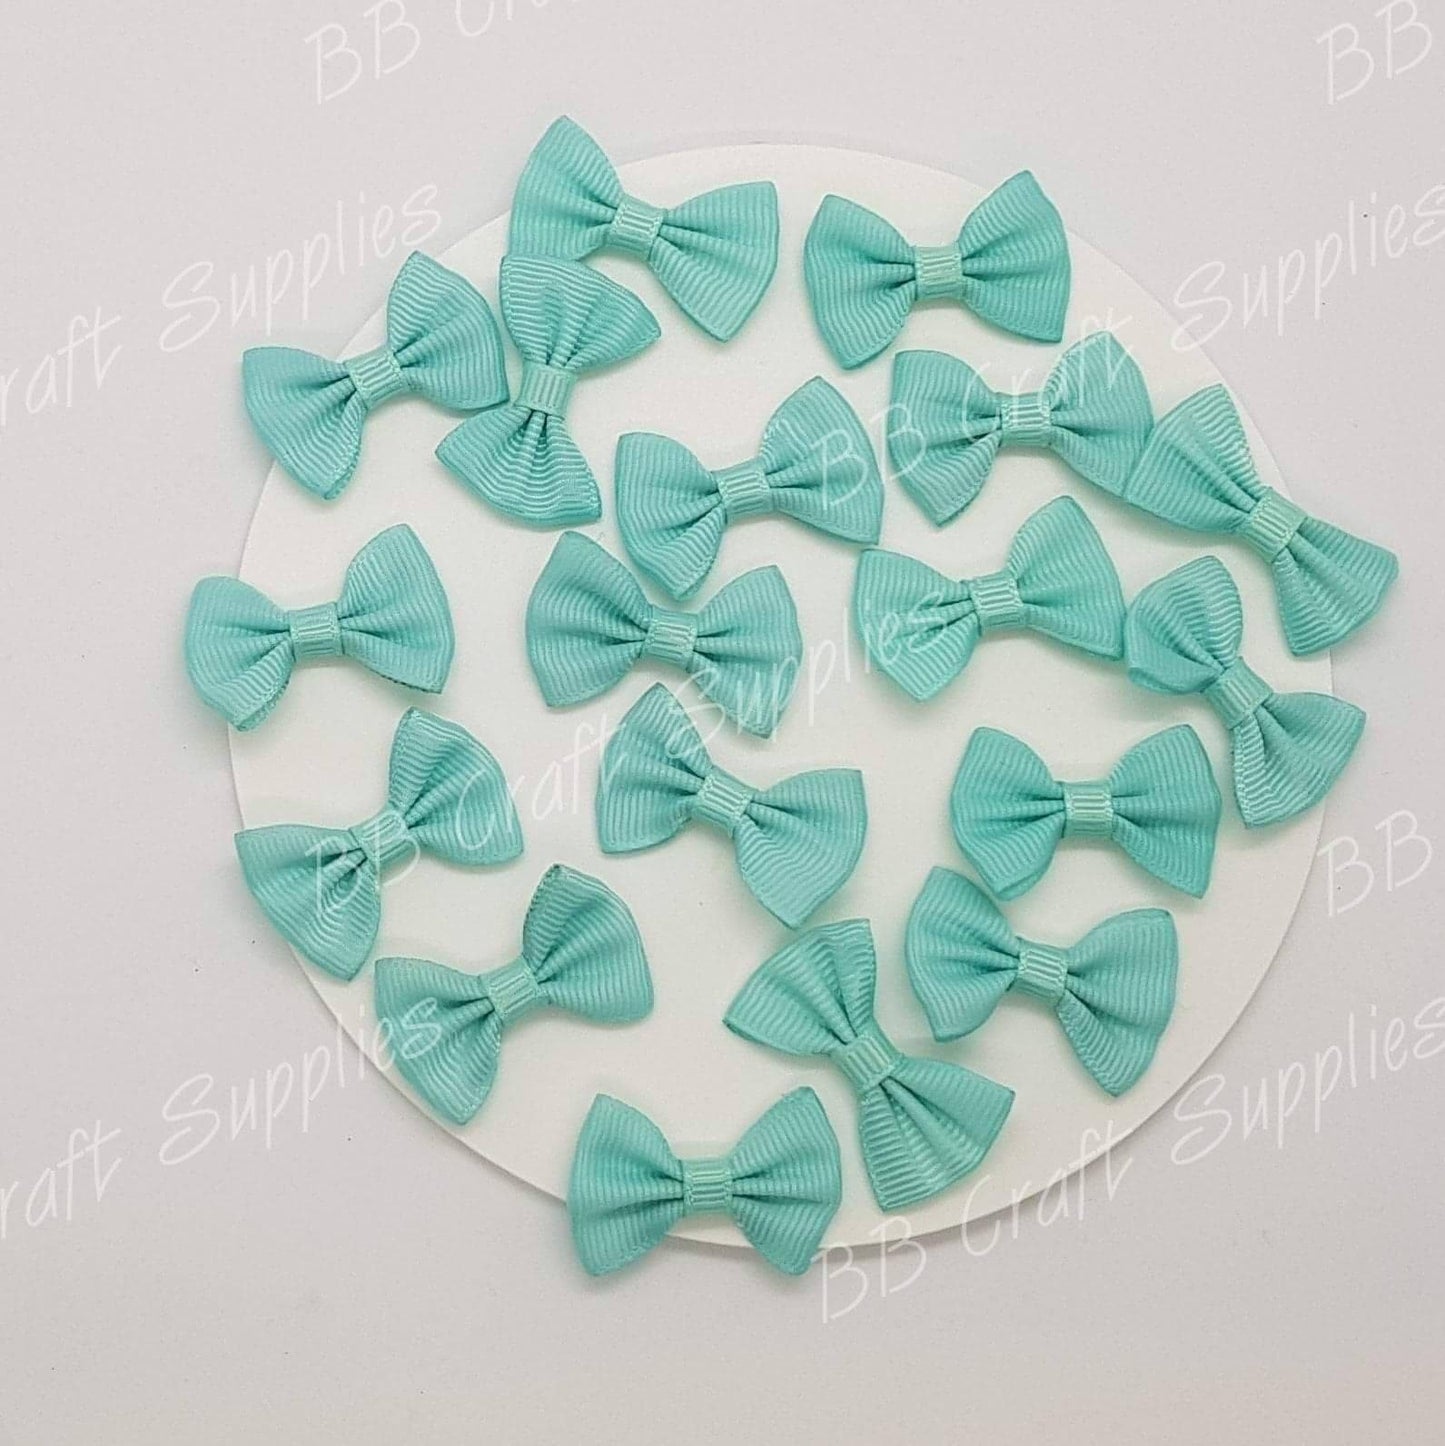 Ribbon Bows - Accessorie, Accessories, Bow, mini, Pre made, Ribbon, Whats new - Bare Butler Faux Leather Supplies 